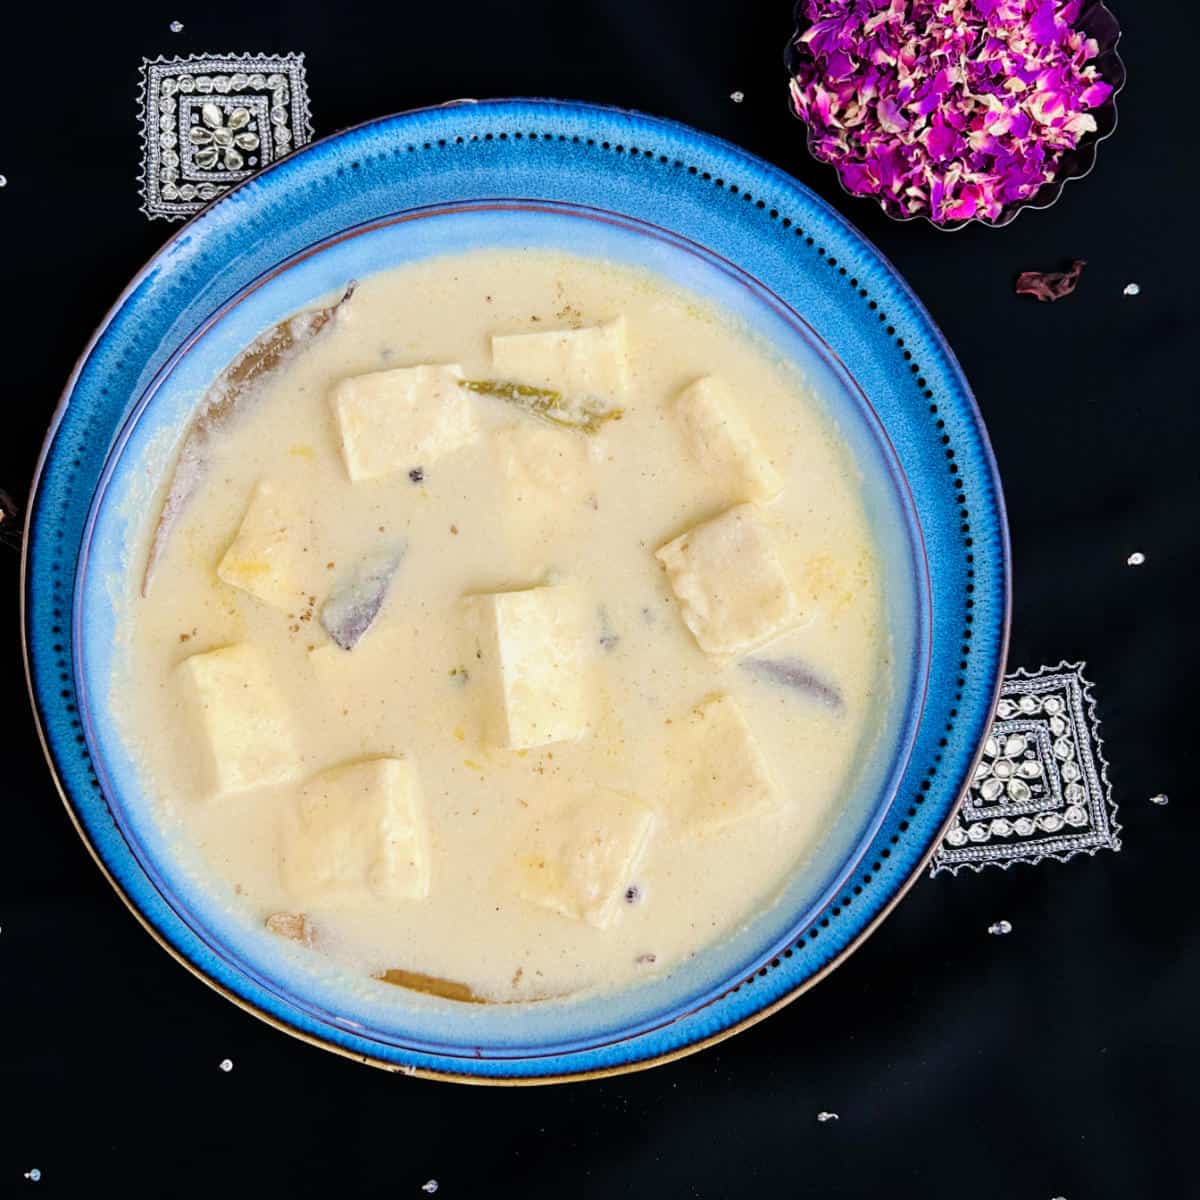 Shahi paneer placed on a black and silver surface along with rose petals.